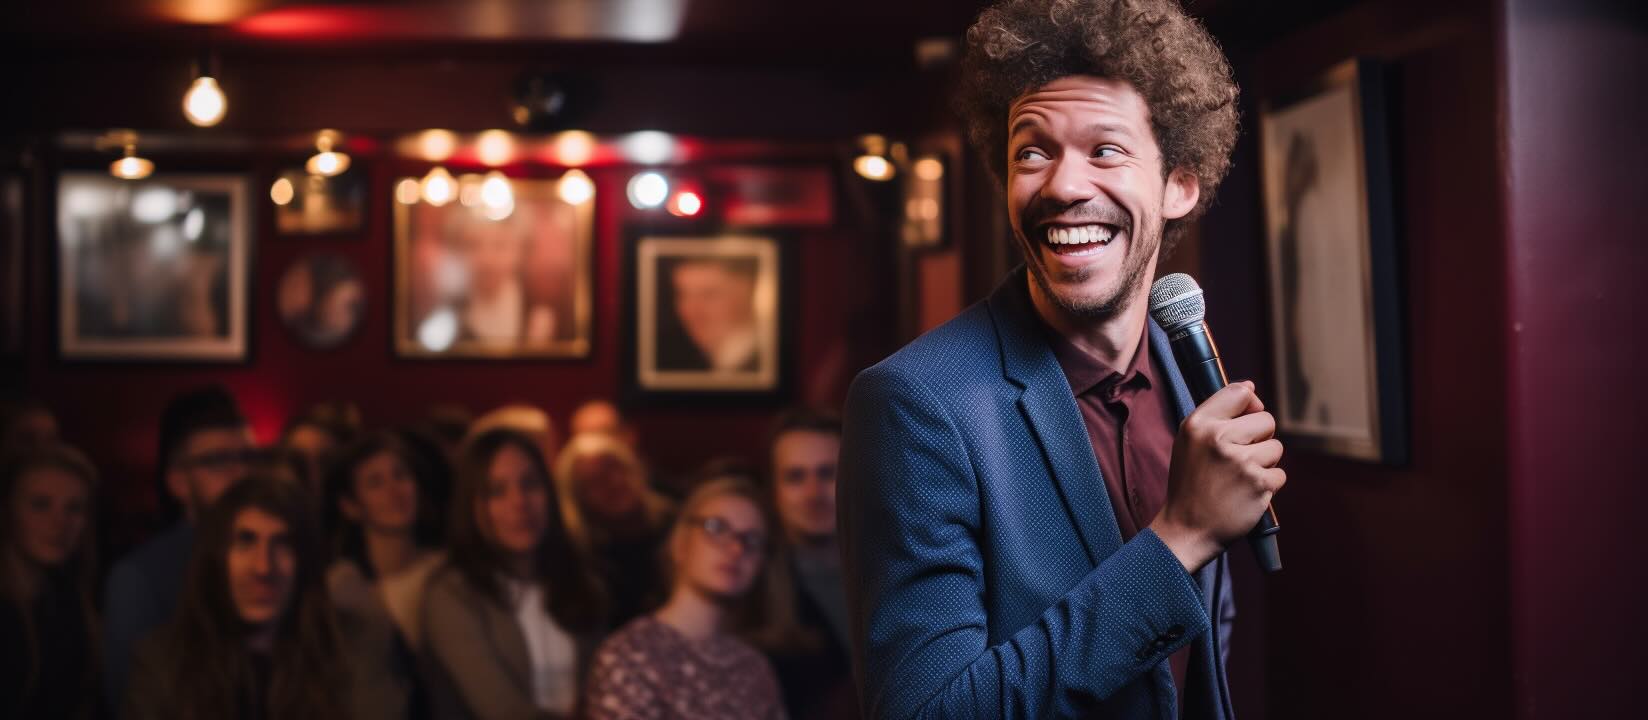 Free Comedy Shows Near You